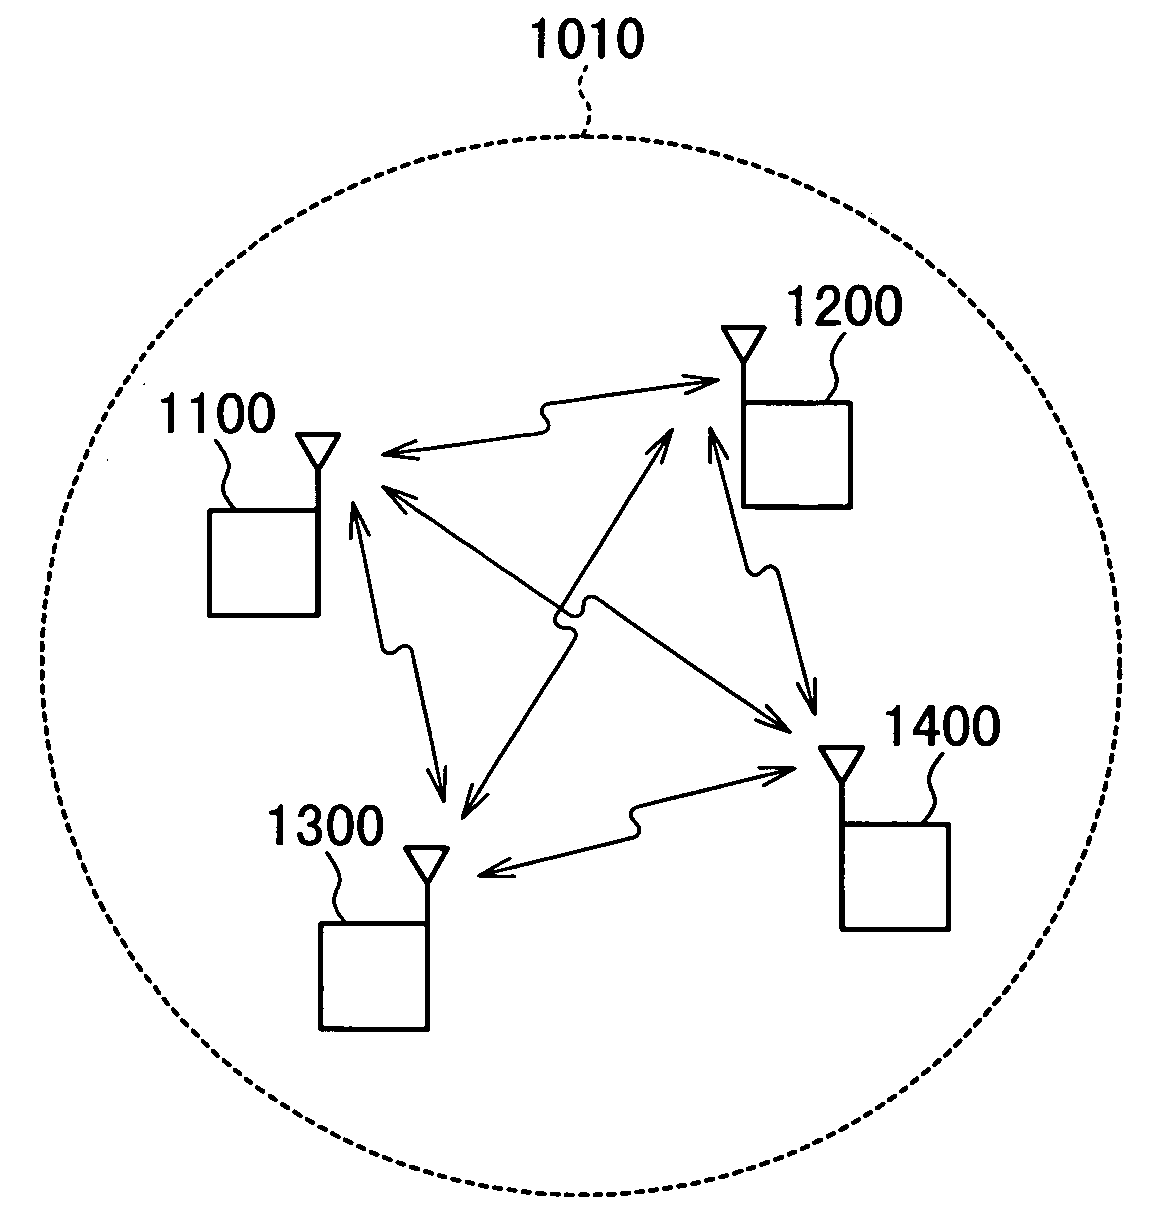 Network Configuration Management Method, Network Band Management Method, Network Participation Method, and Communication Terminal Device